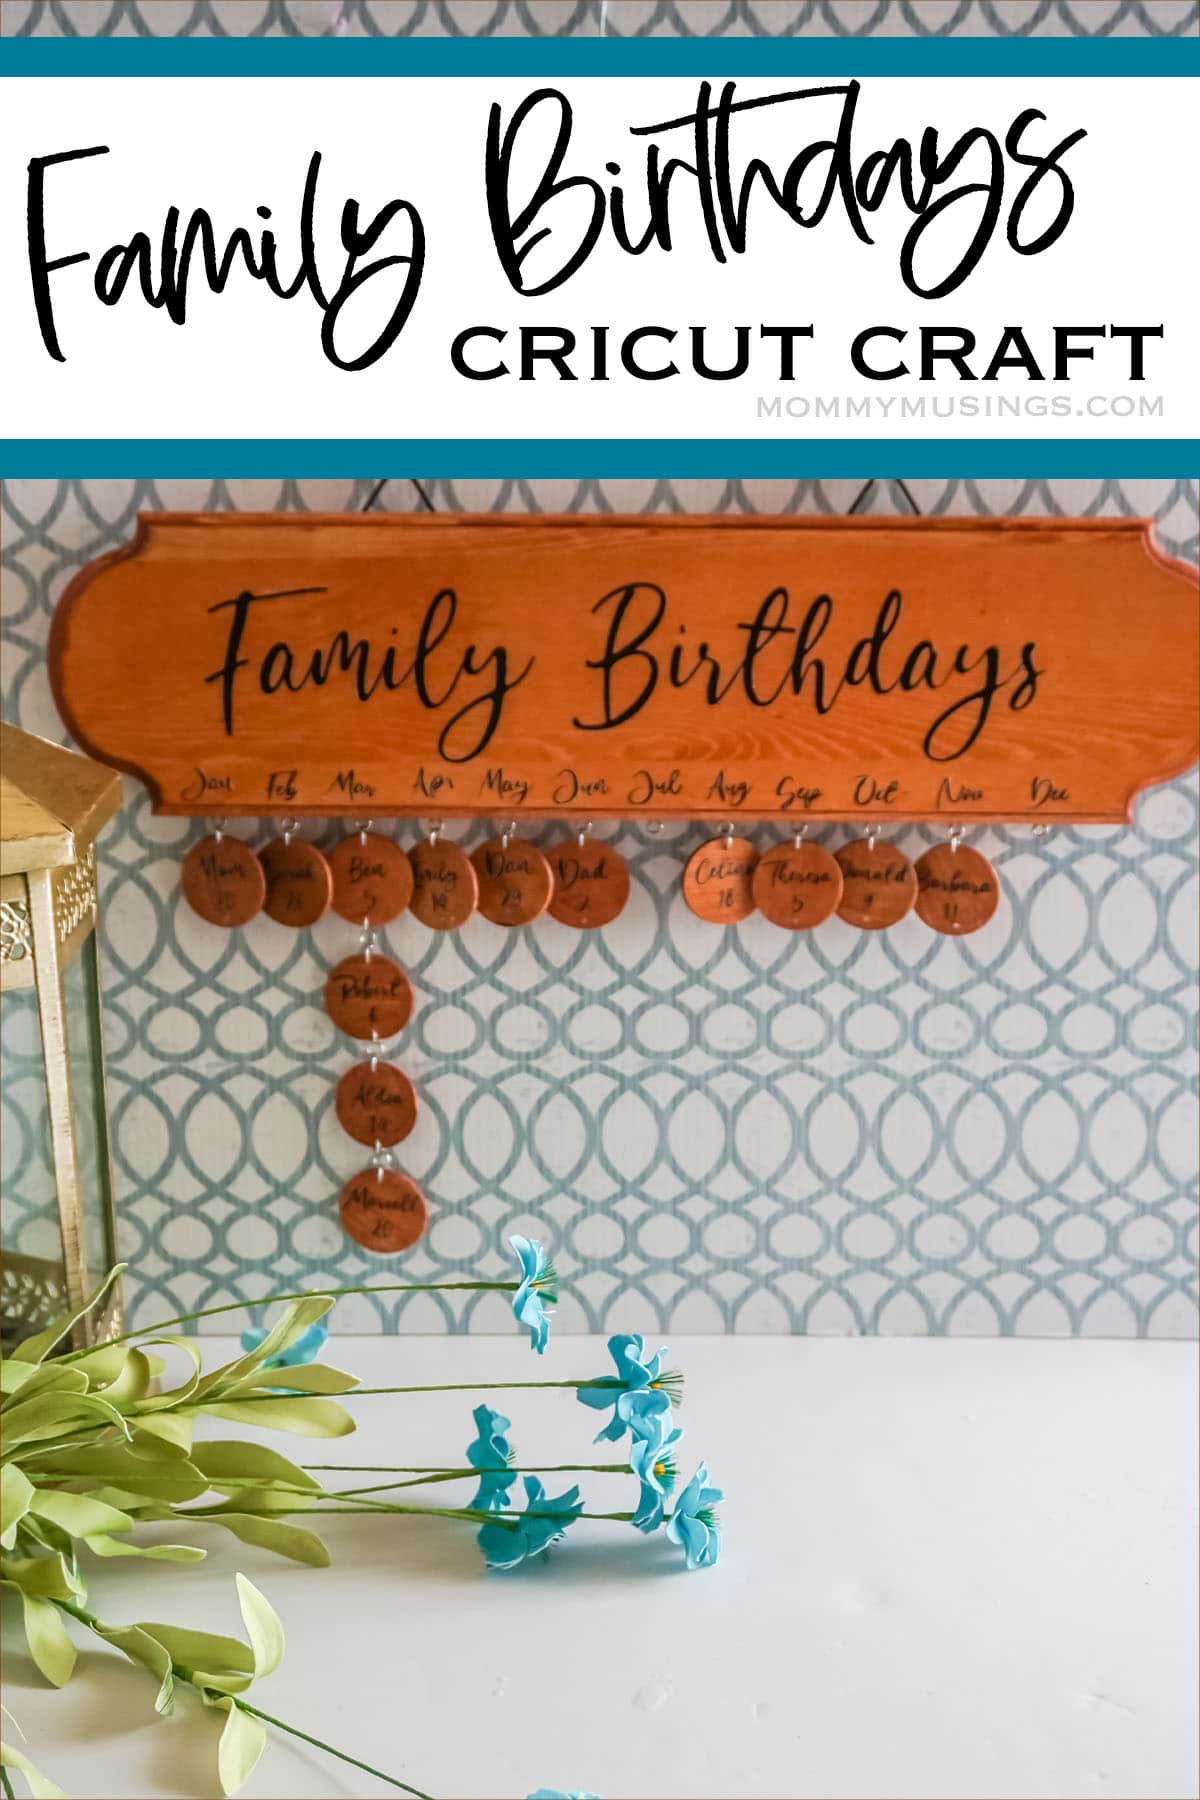 family birthdays plaque with text which reads family birthdays cricut craft